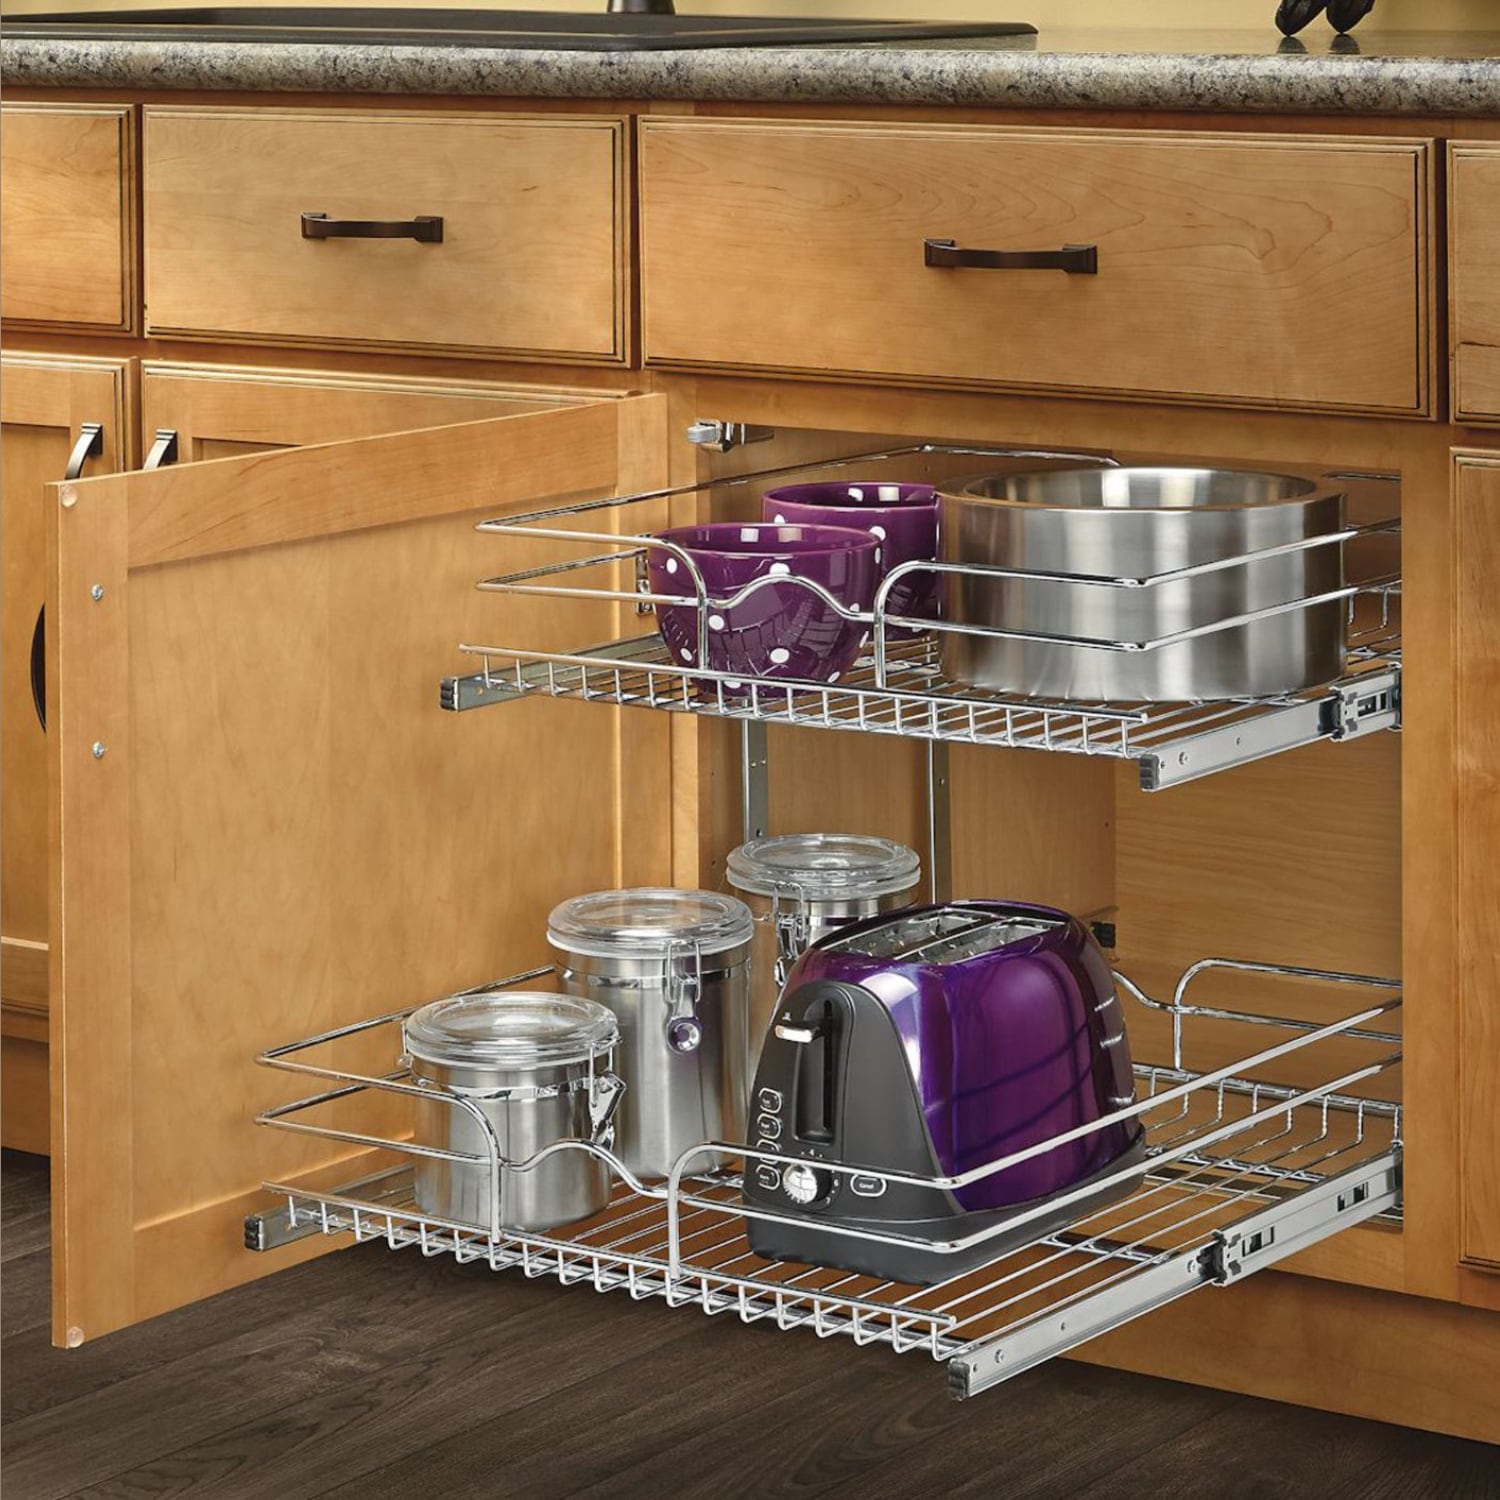 Rev-A-Shelf 15-inch Pullout 2 Tier Wire Basket Cookware Cabinet Organizer Chrome